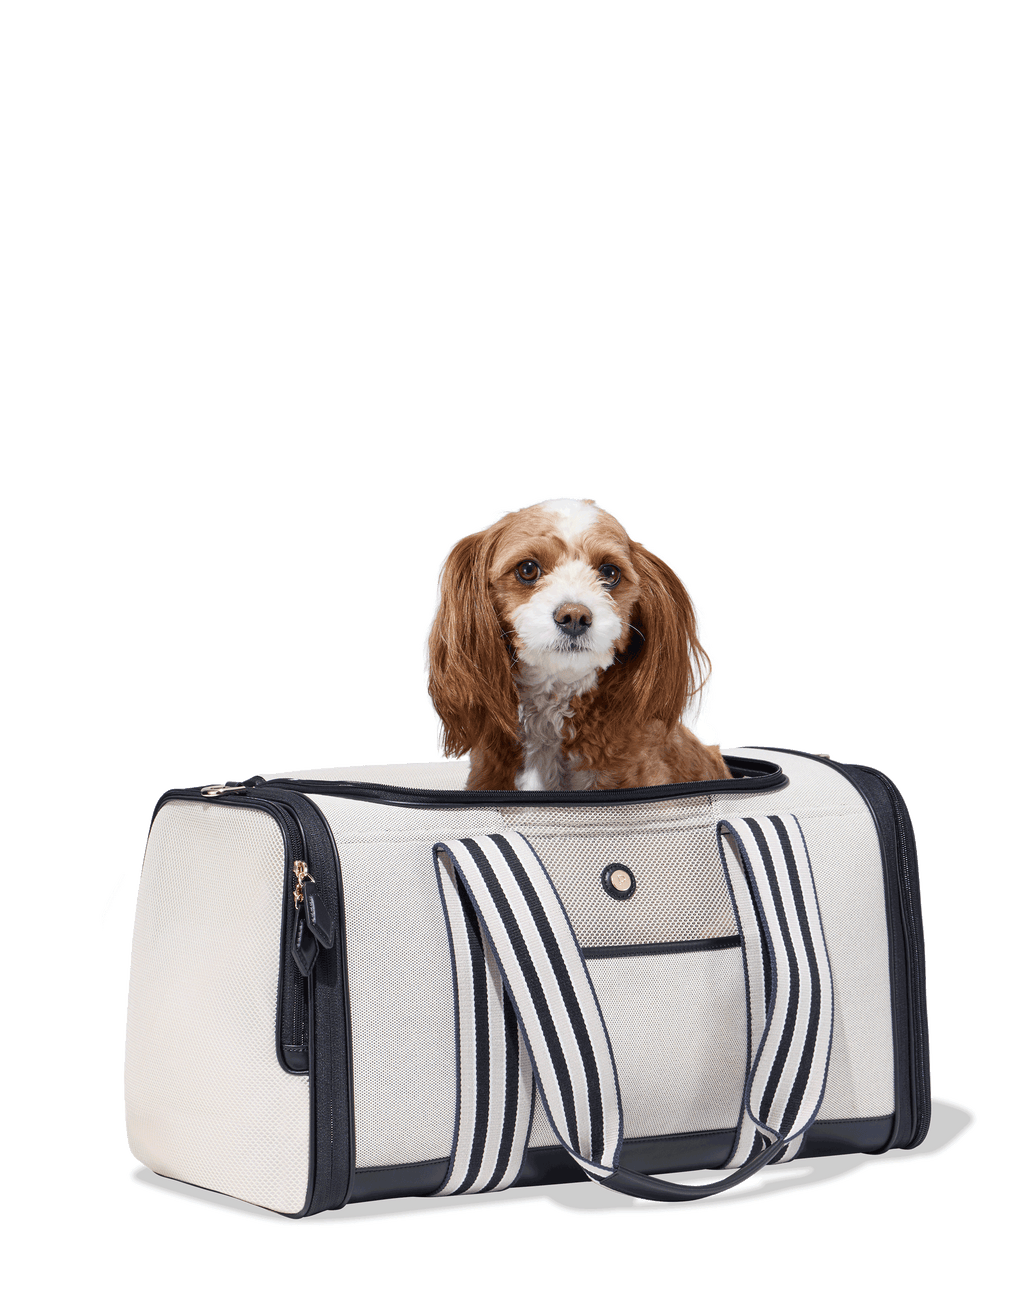 Buy Dog Louis Vuitton Online In India -  India